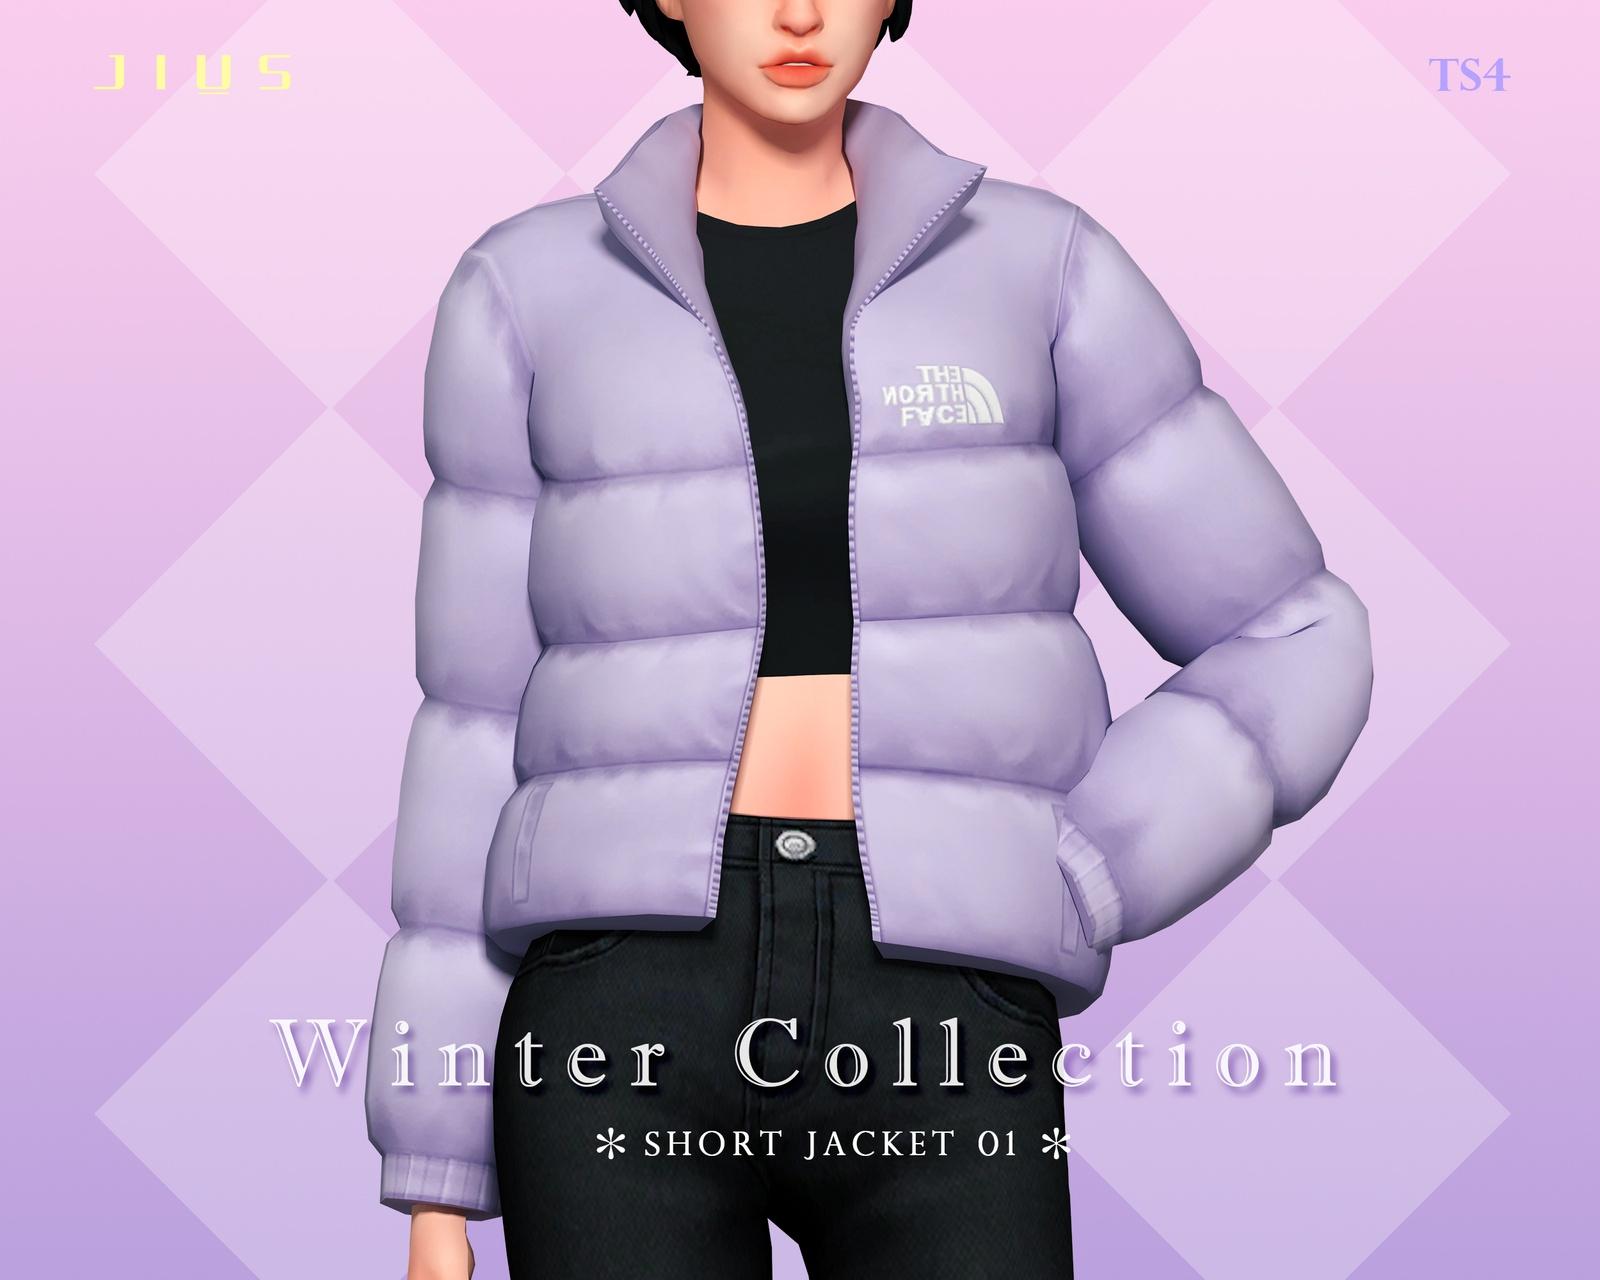 winter collection part 1 clothes jius sims